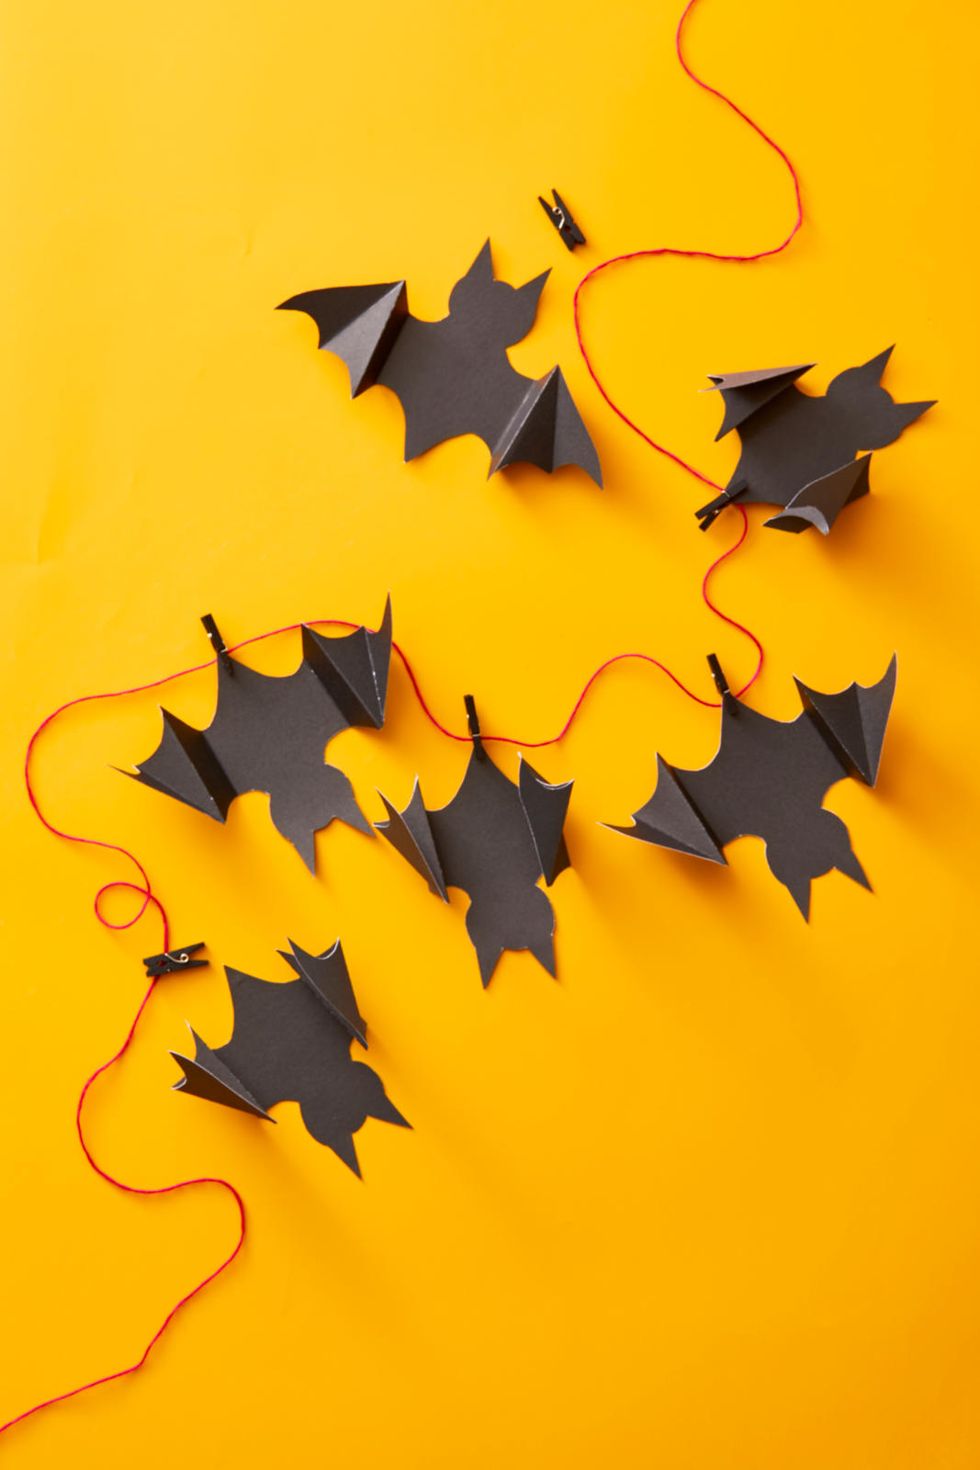 Halloween Crafts for Adults ⋆ Dream a Little Bigger